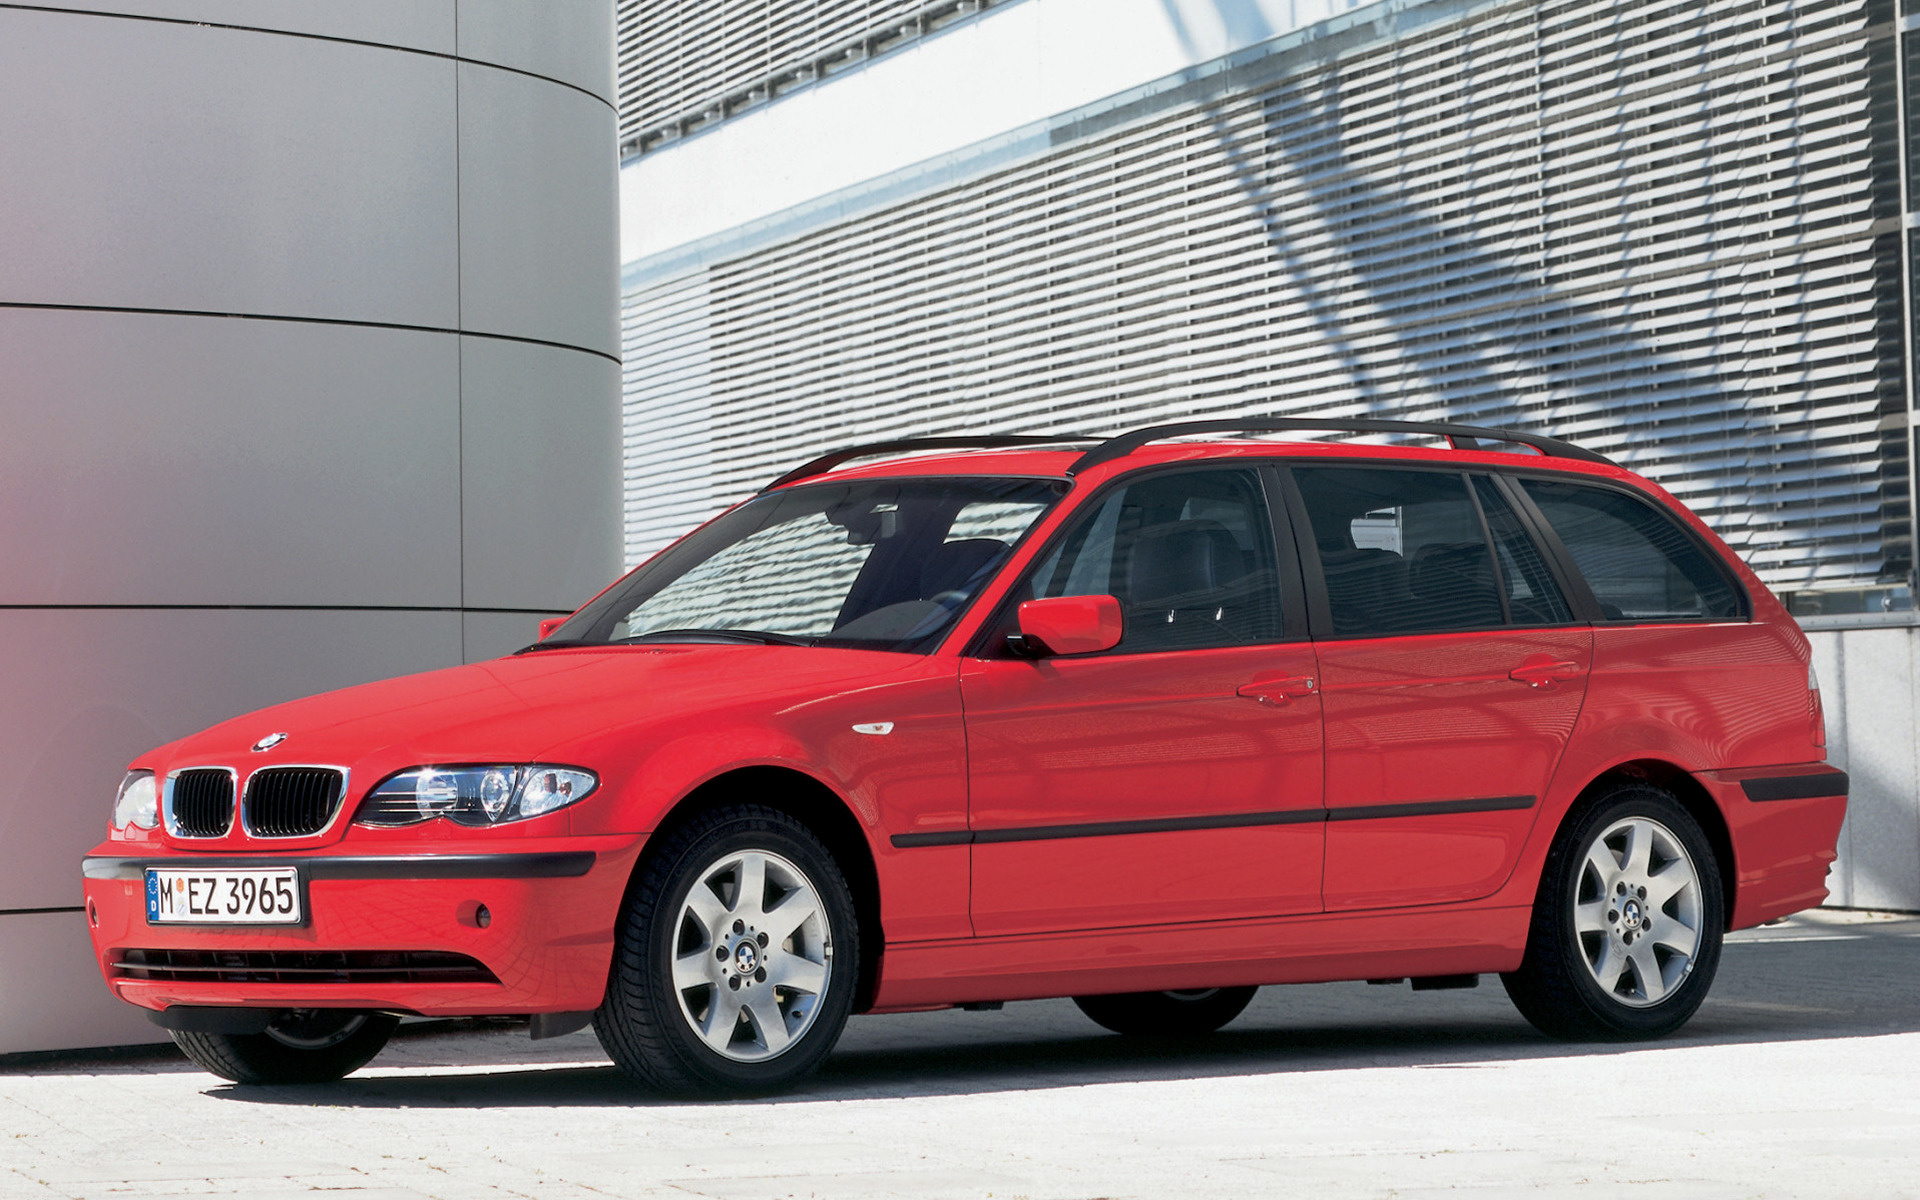 Hertogin Installeren oven 2001 BMW 3 Series Touring - Wallpapers and HD Images | Car Pixel